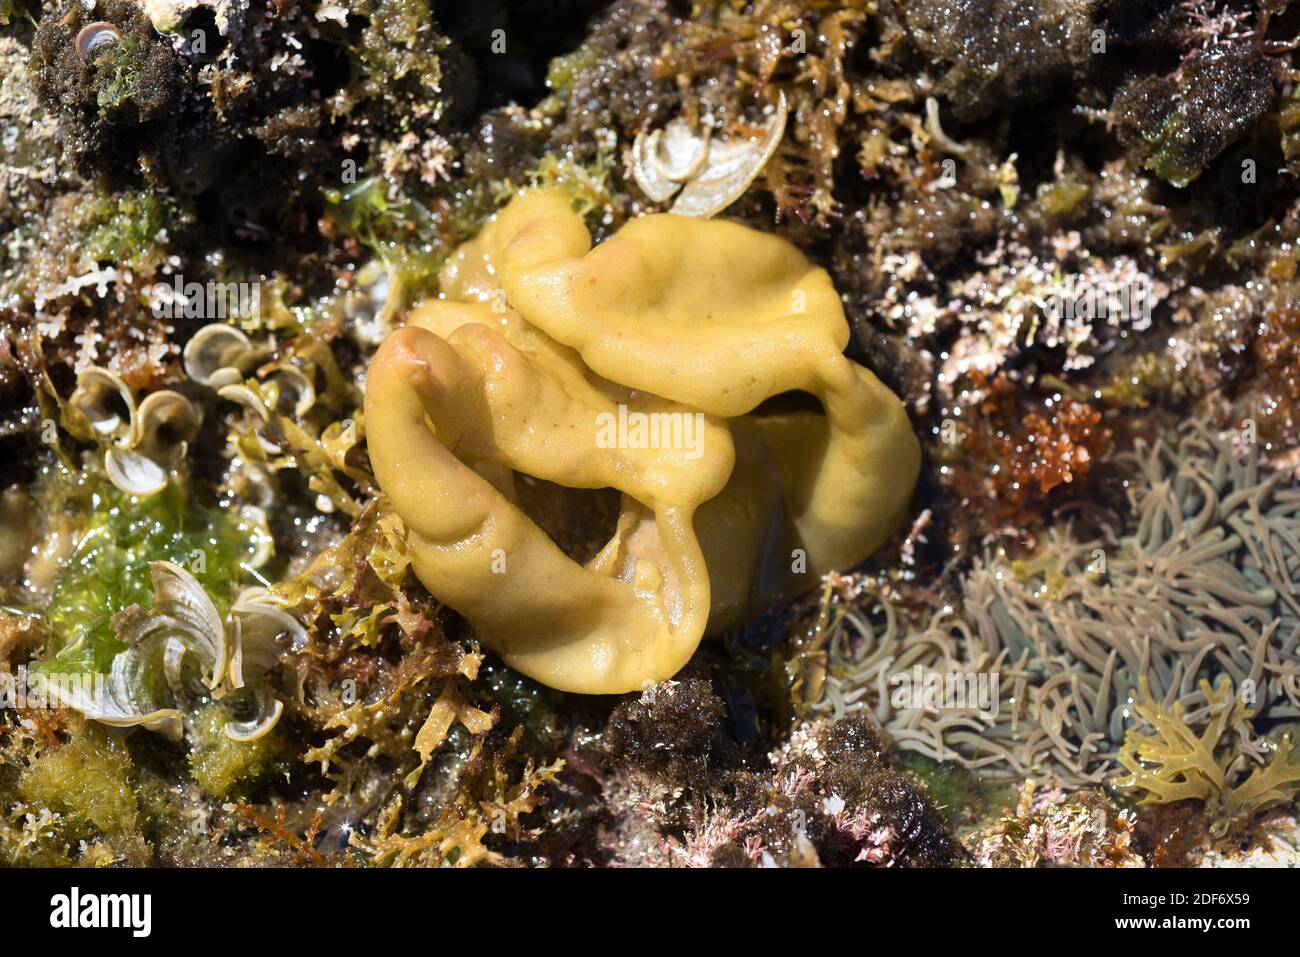 Oyster thief or sinuous ballweed (Colpomenia sinuosa) is a marine brown alga present in temperate seas. At right Anemonia sulcata tentacles. This Stock Photo